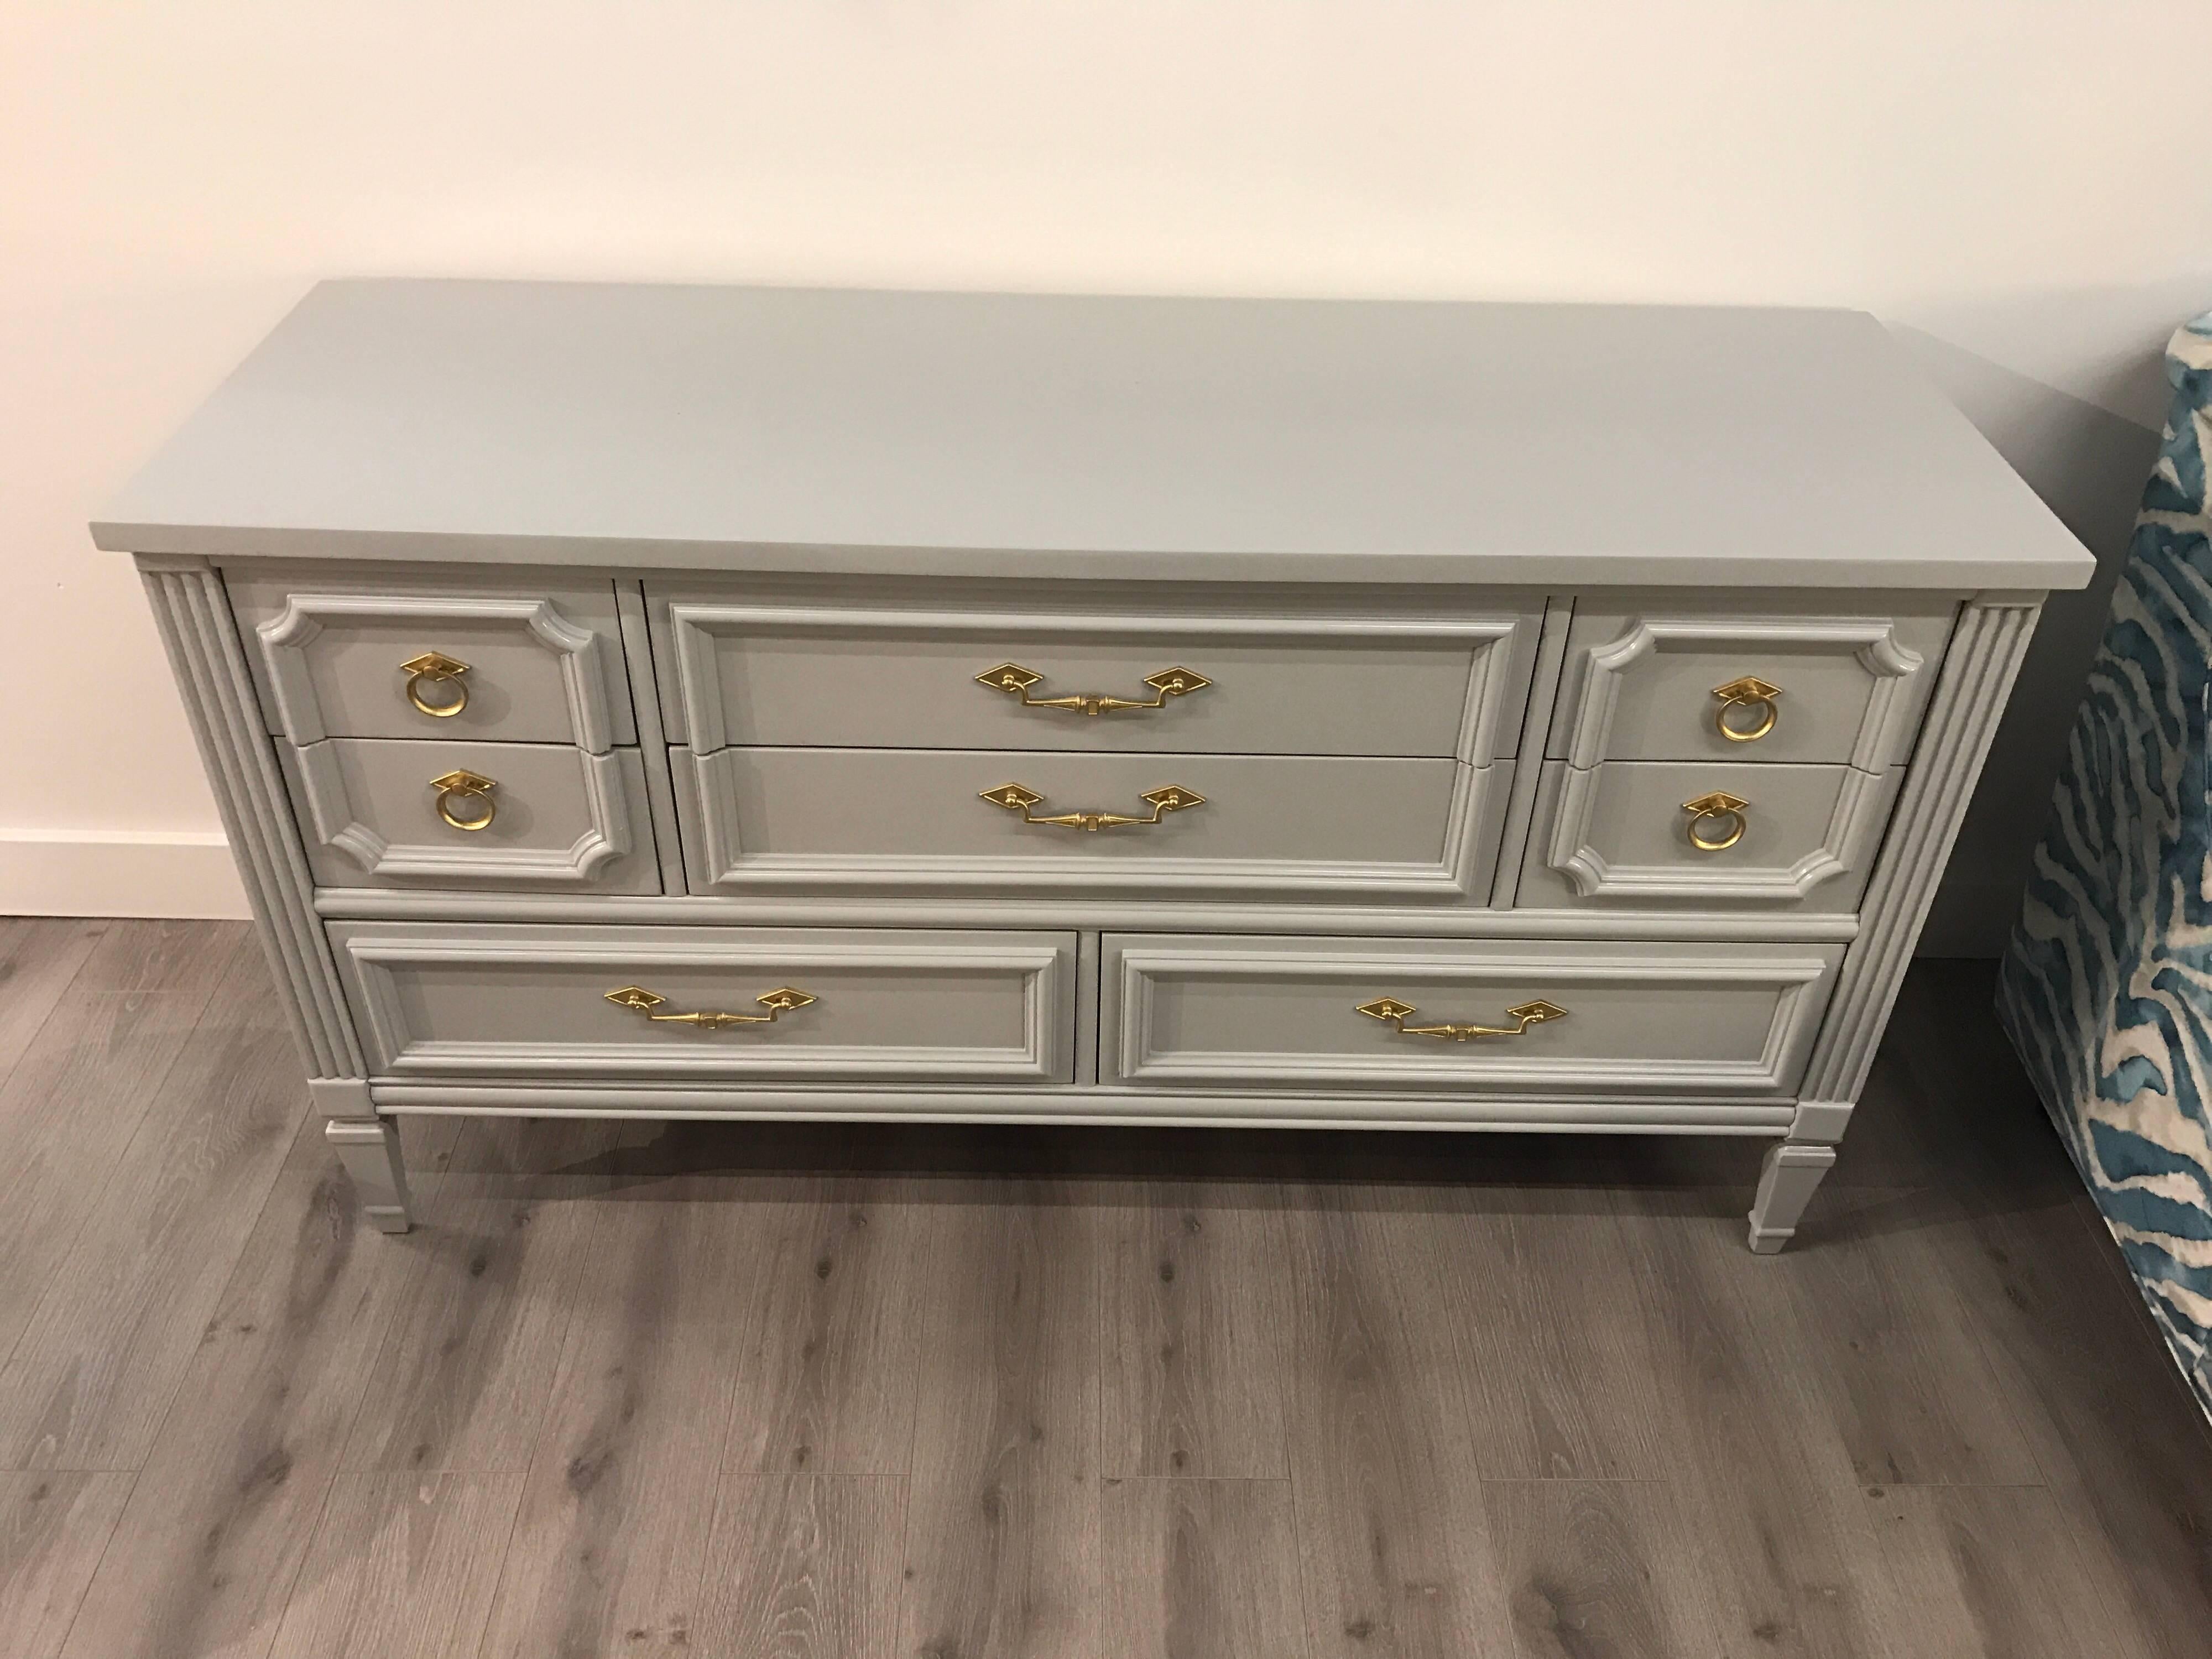 Fully restored custom gray lacquer dresser, chest of drawers, credenza with gold hardware. Spectacular!